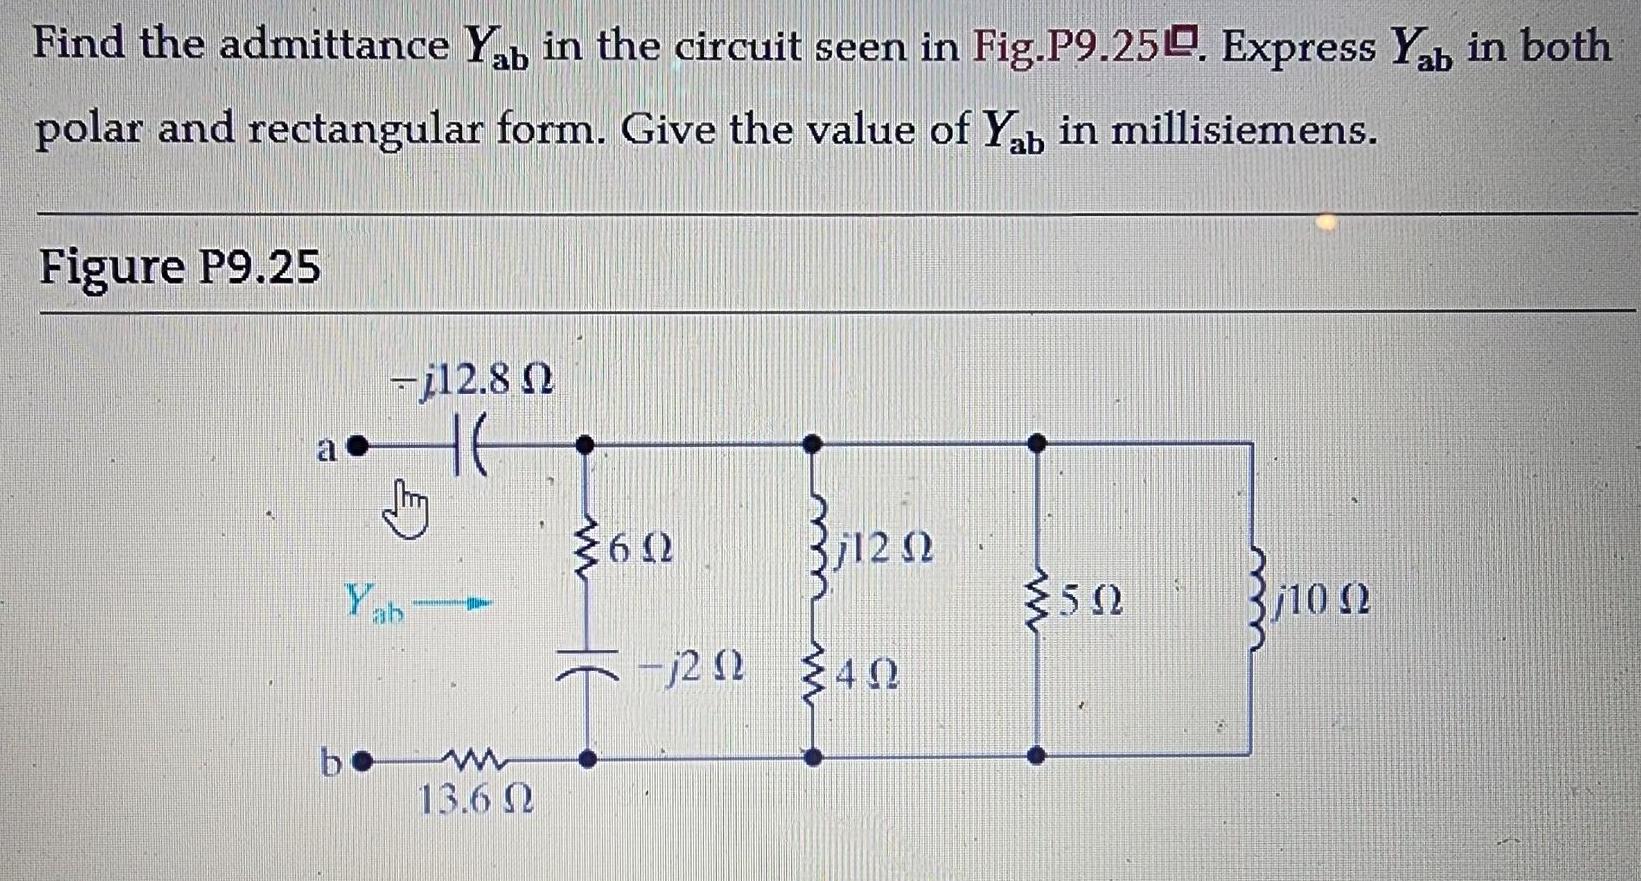 Find the admittance Yab in the circuit seen in Fig.P9.250. Express Yab in both polar and rectangular form.